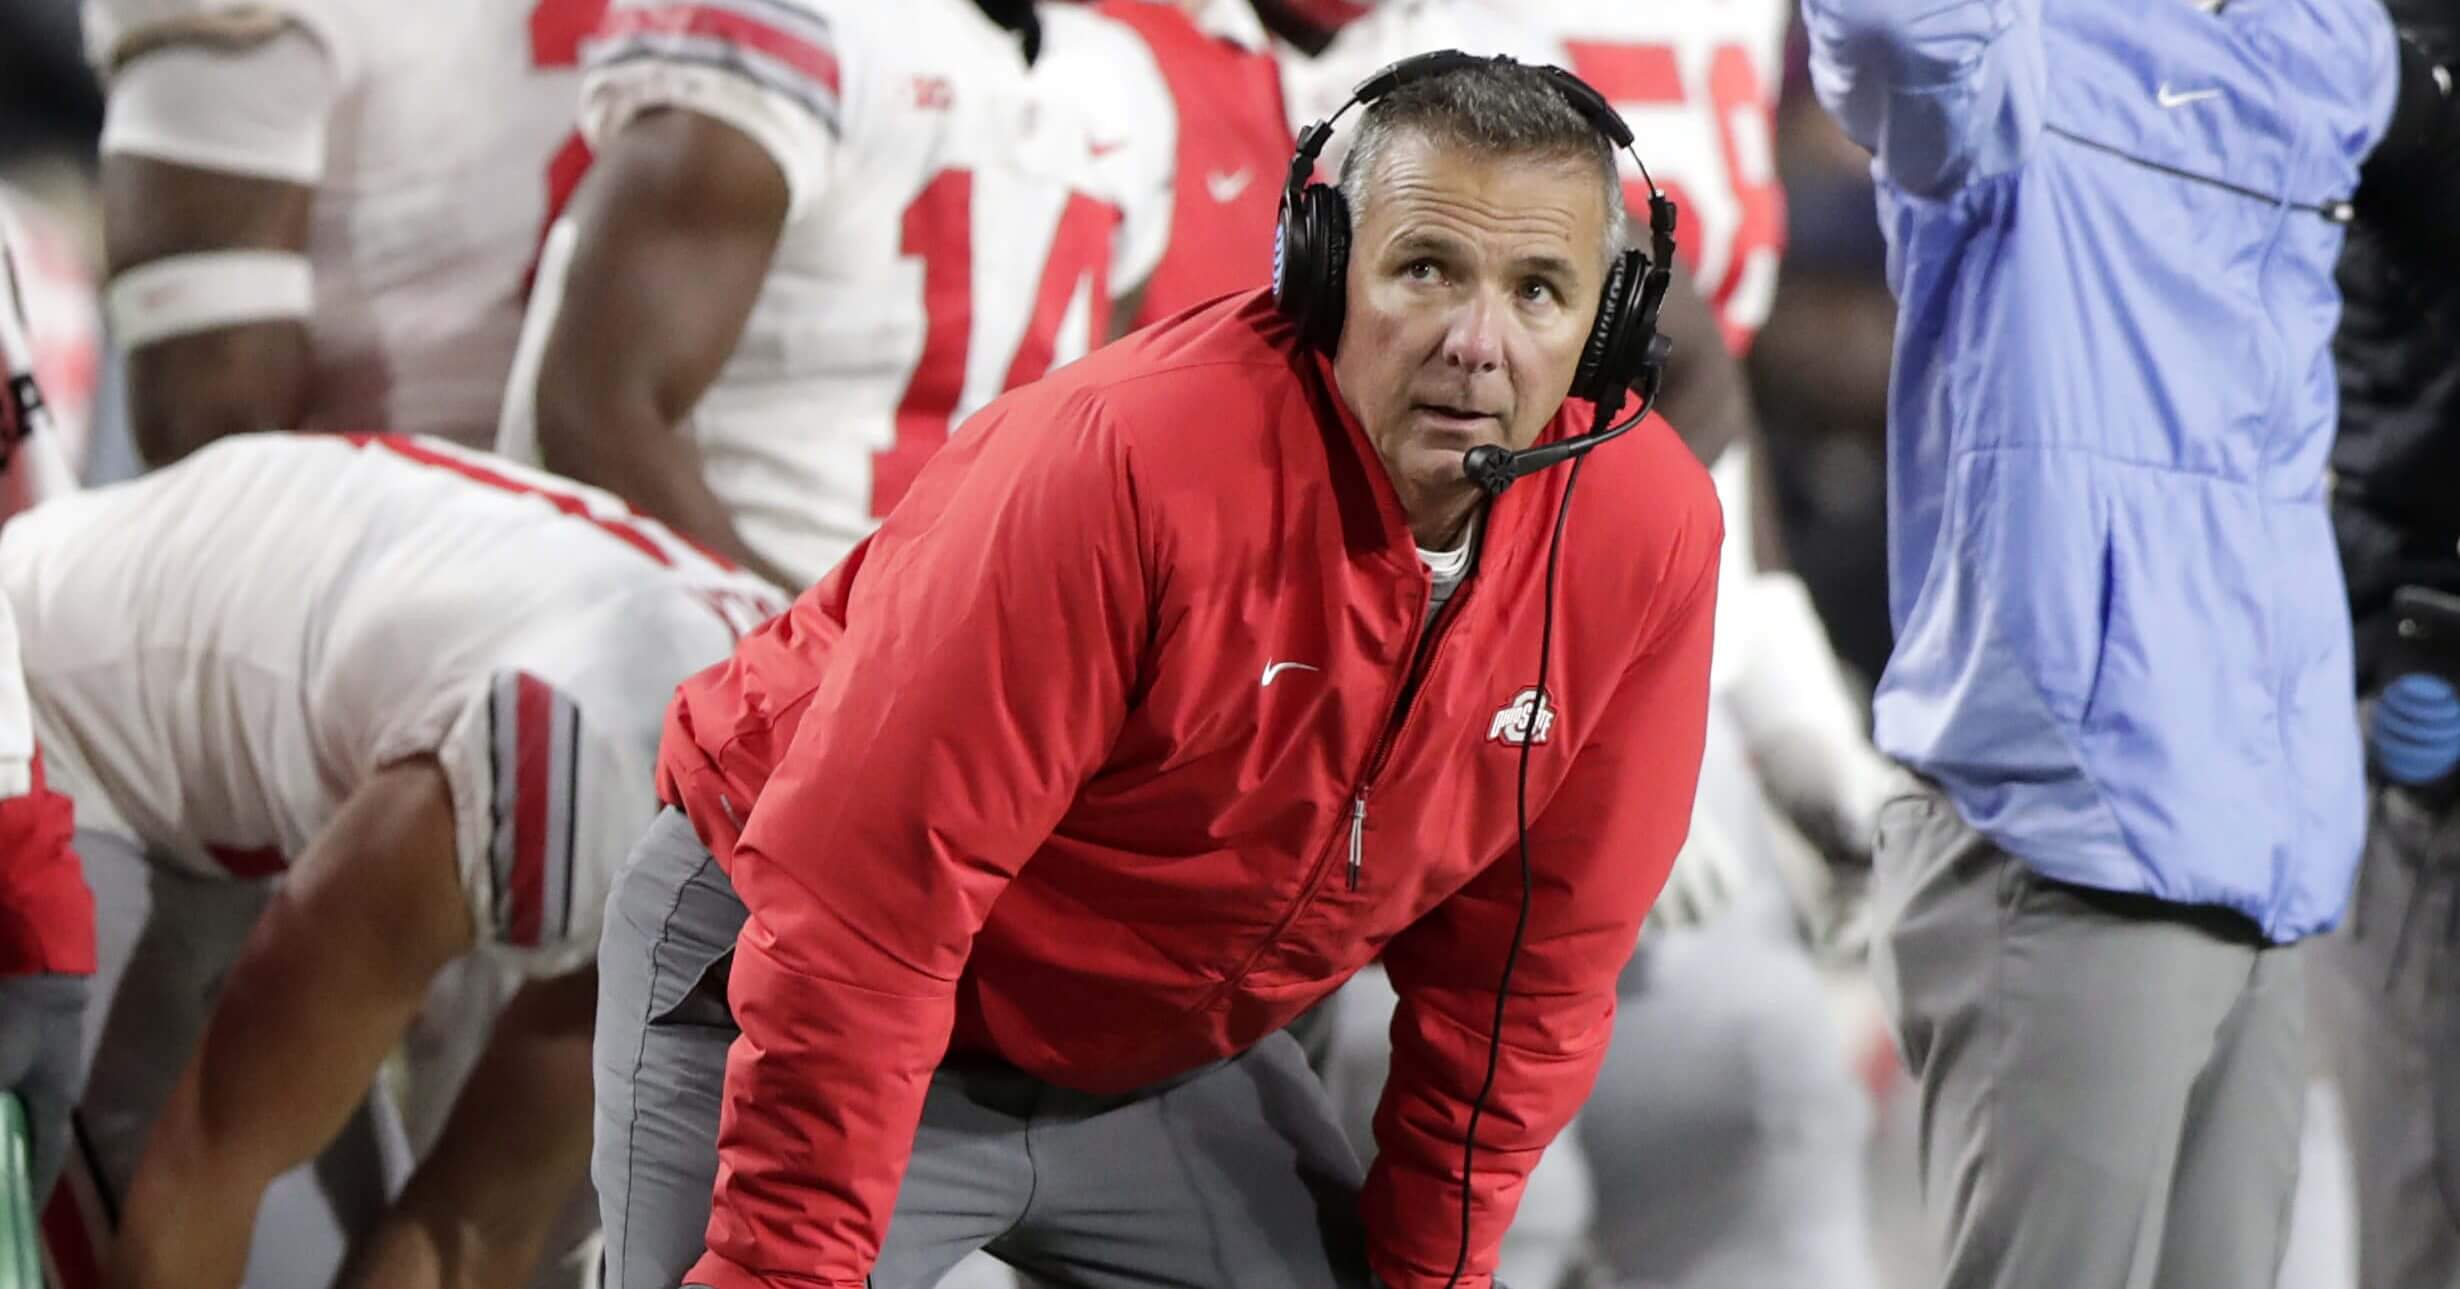 Ohio State head coach Urban Meyer watches from the sideline during the Oct. 20 game against Purdue in West Lafayette, Indiana.